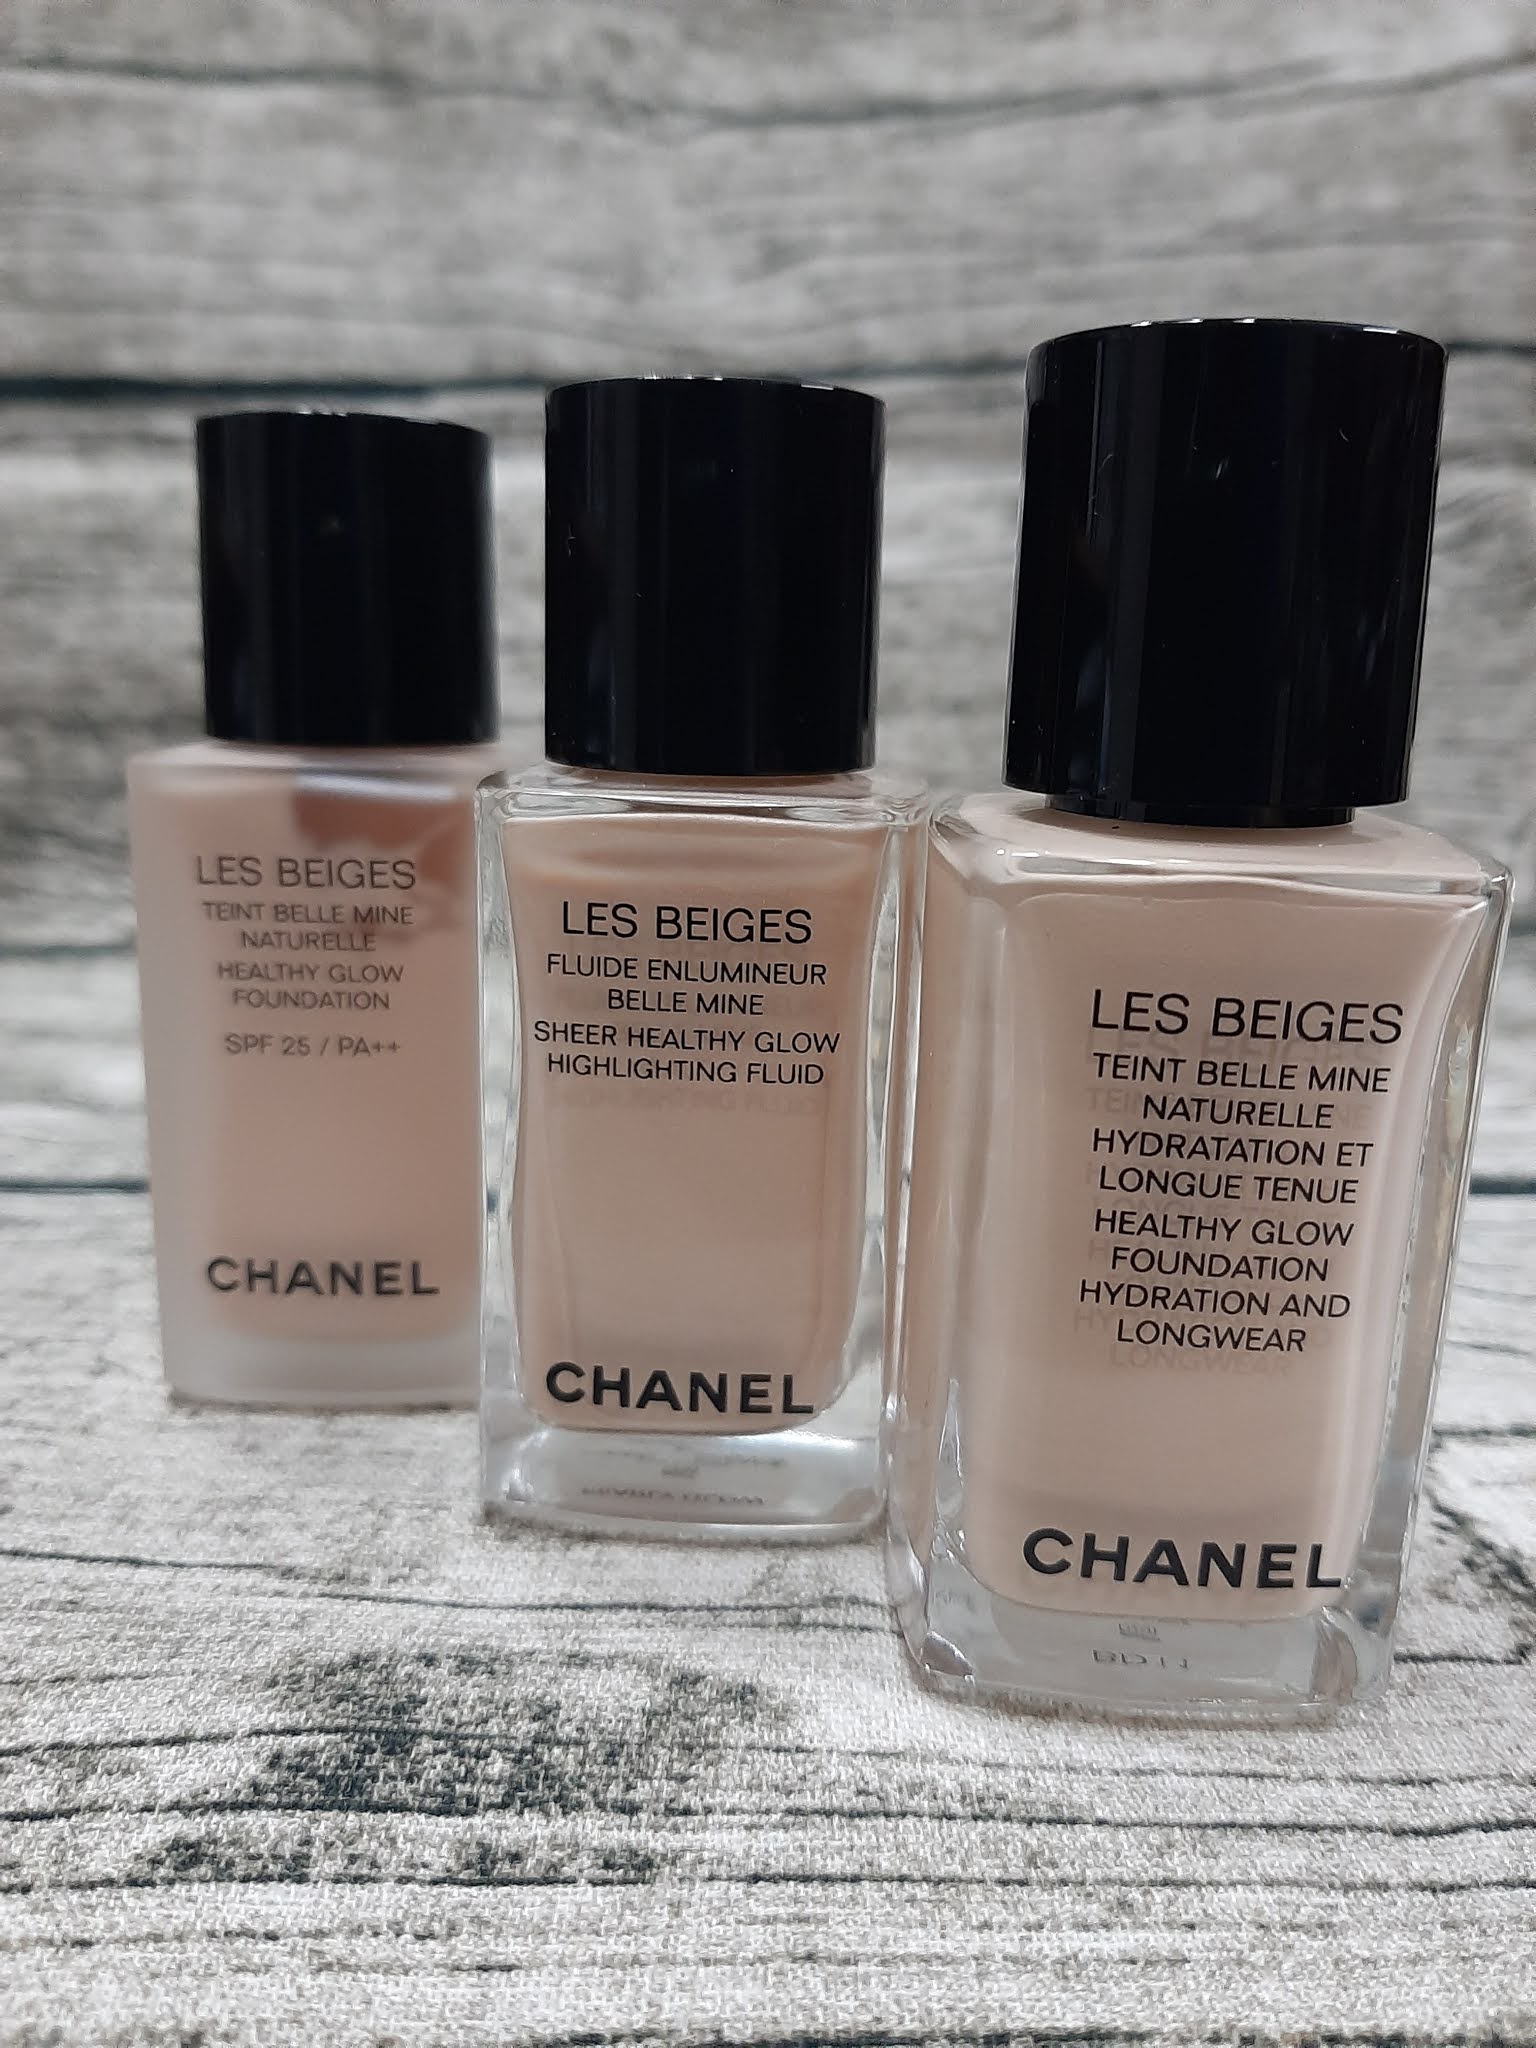 All About That Base: Chanel Les Beiges Healthy Glow Foundation